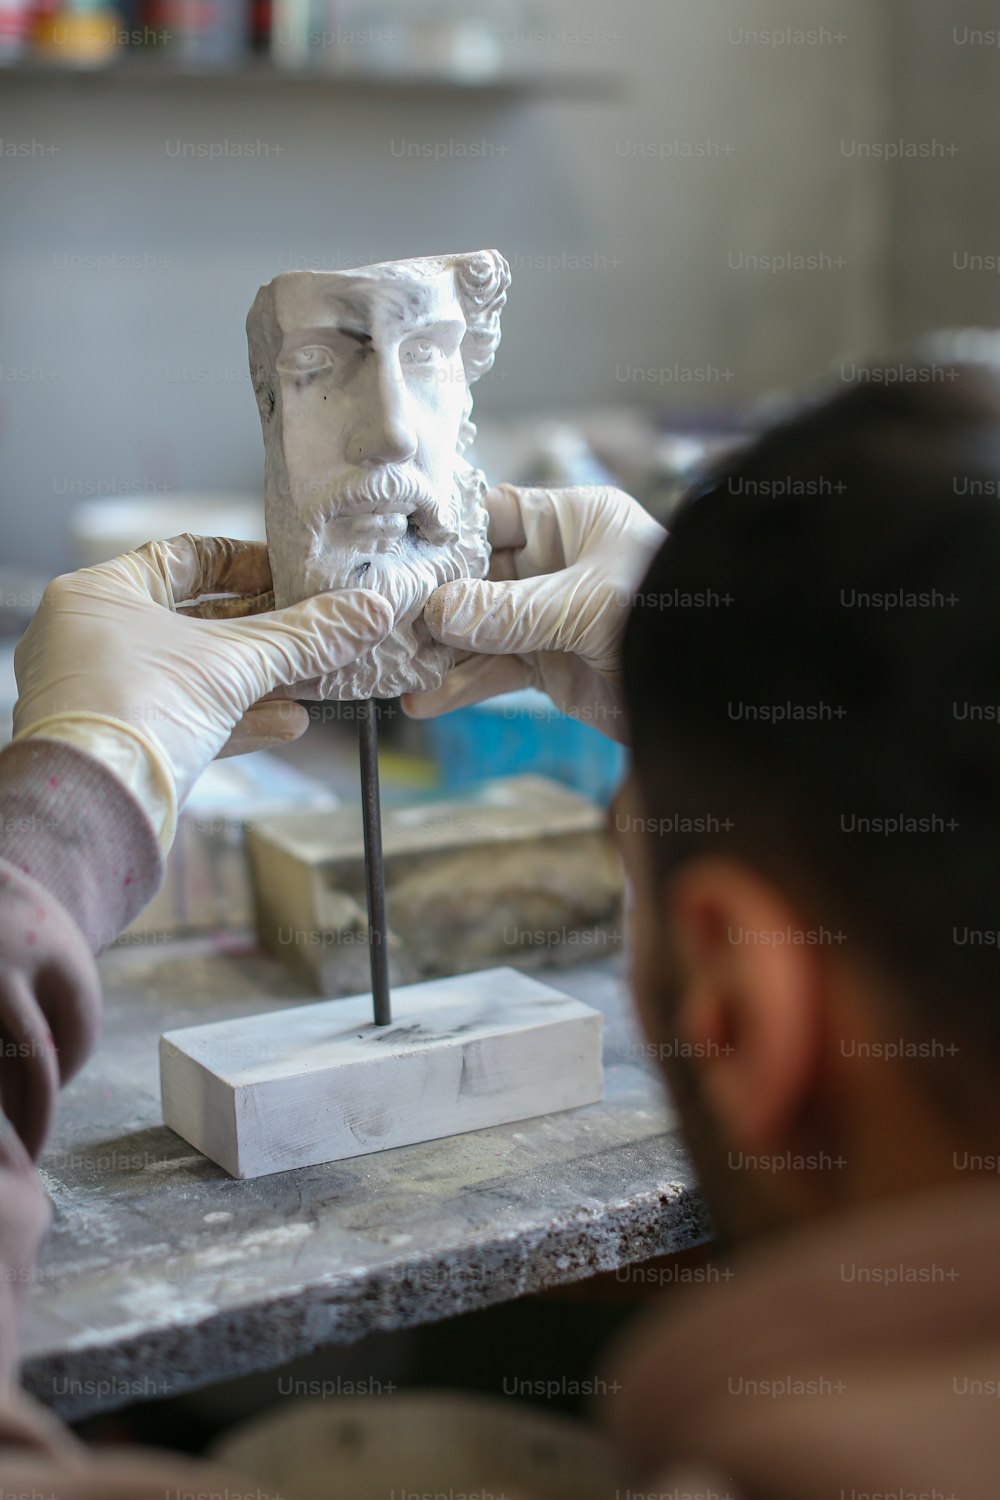 a man is making a statue of a man with a beard